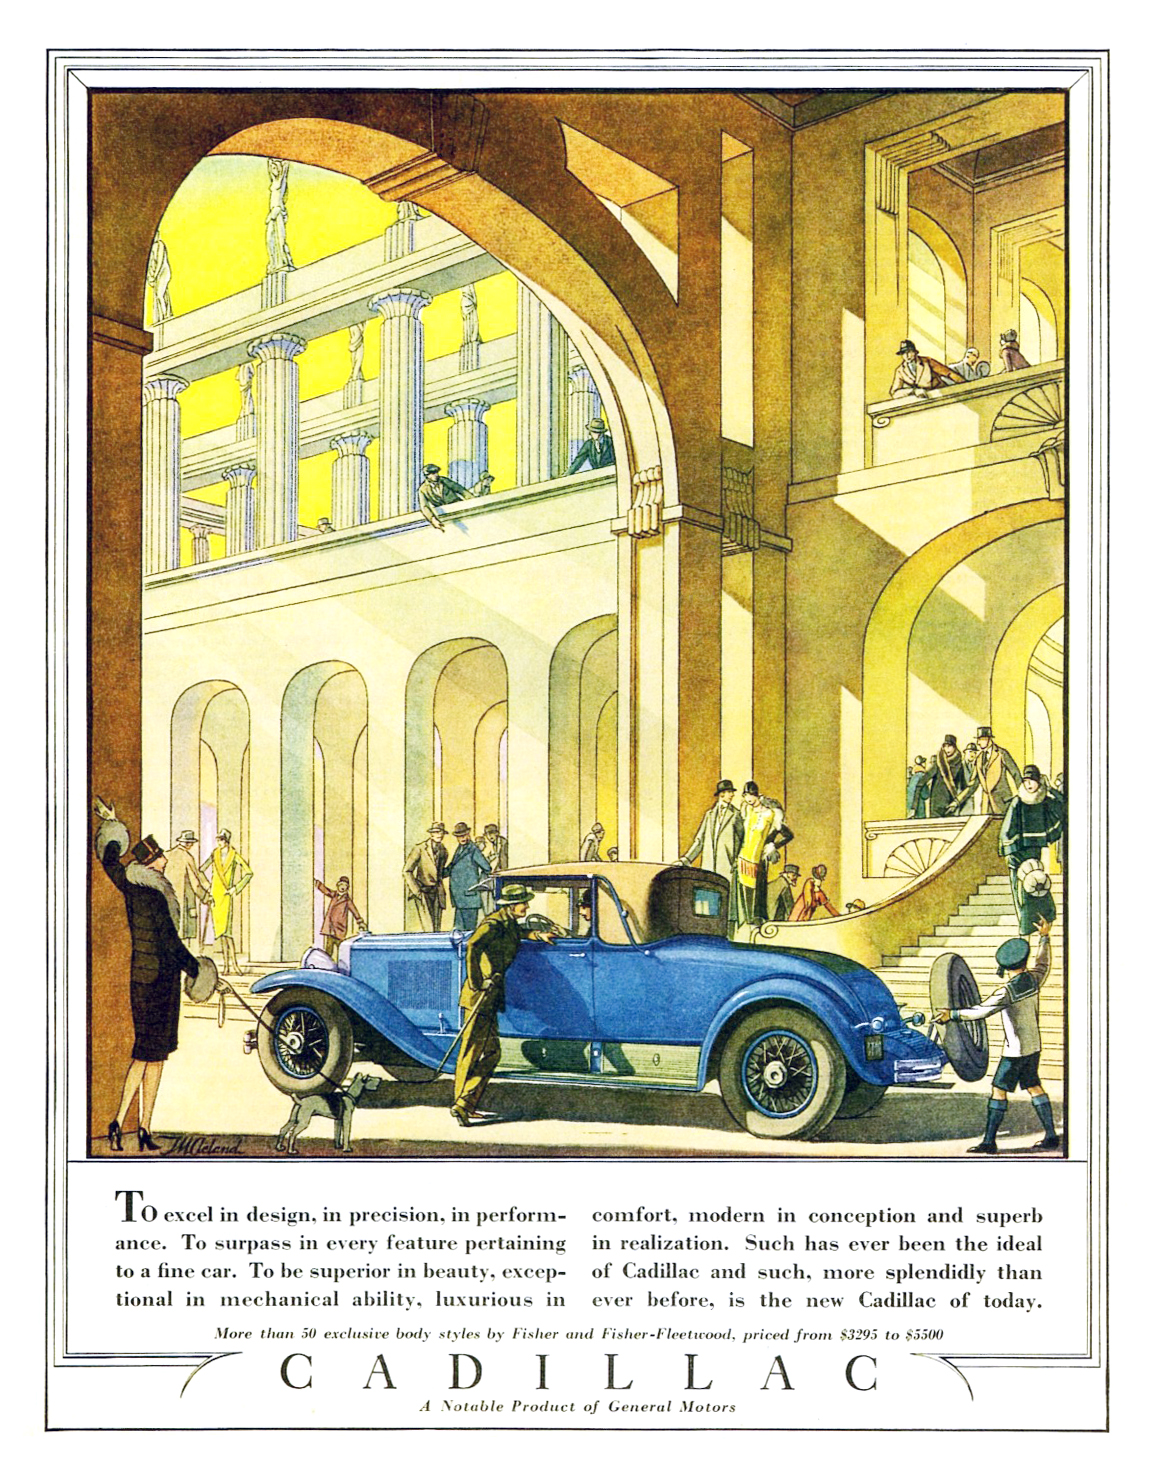 Cadillac Convertible Coupe Ad (December, 1927): Illustrated by Thomas M. Cleland